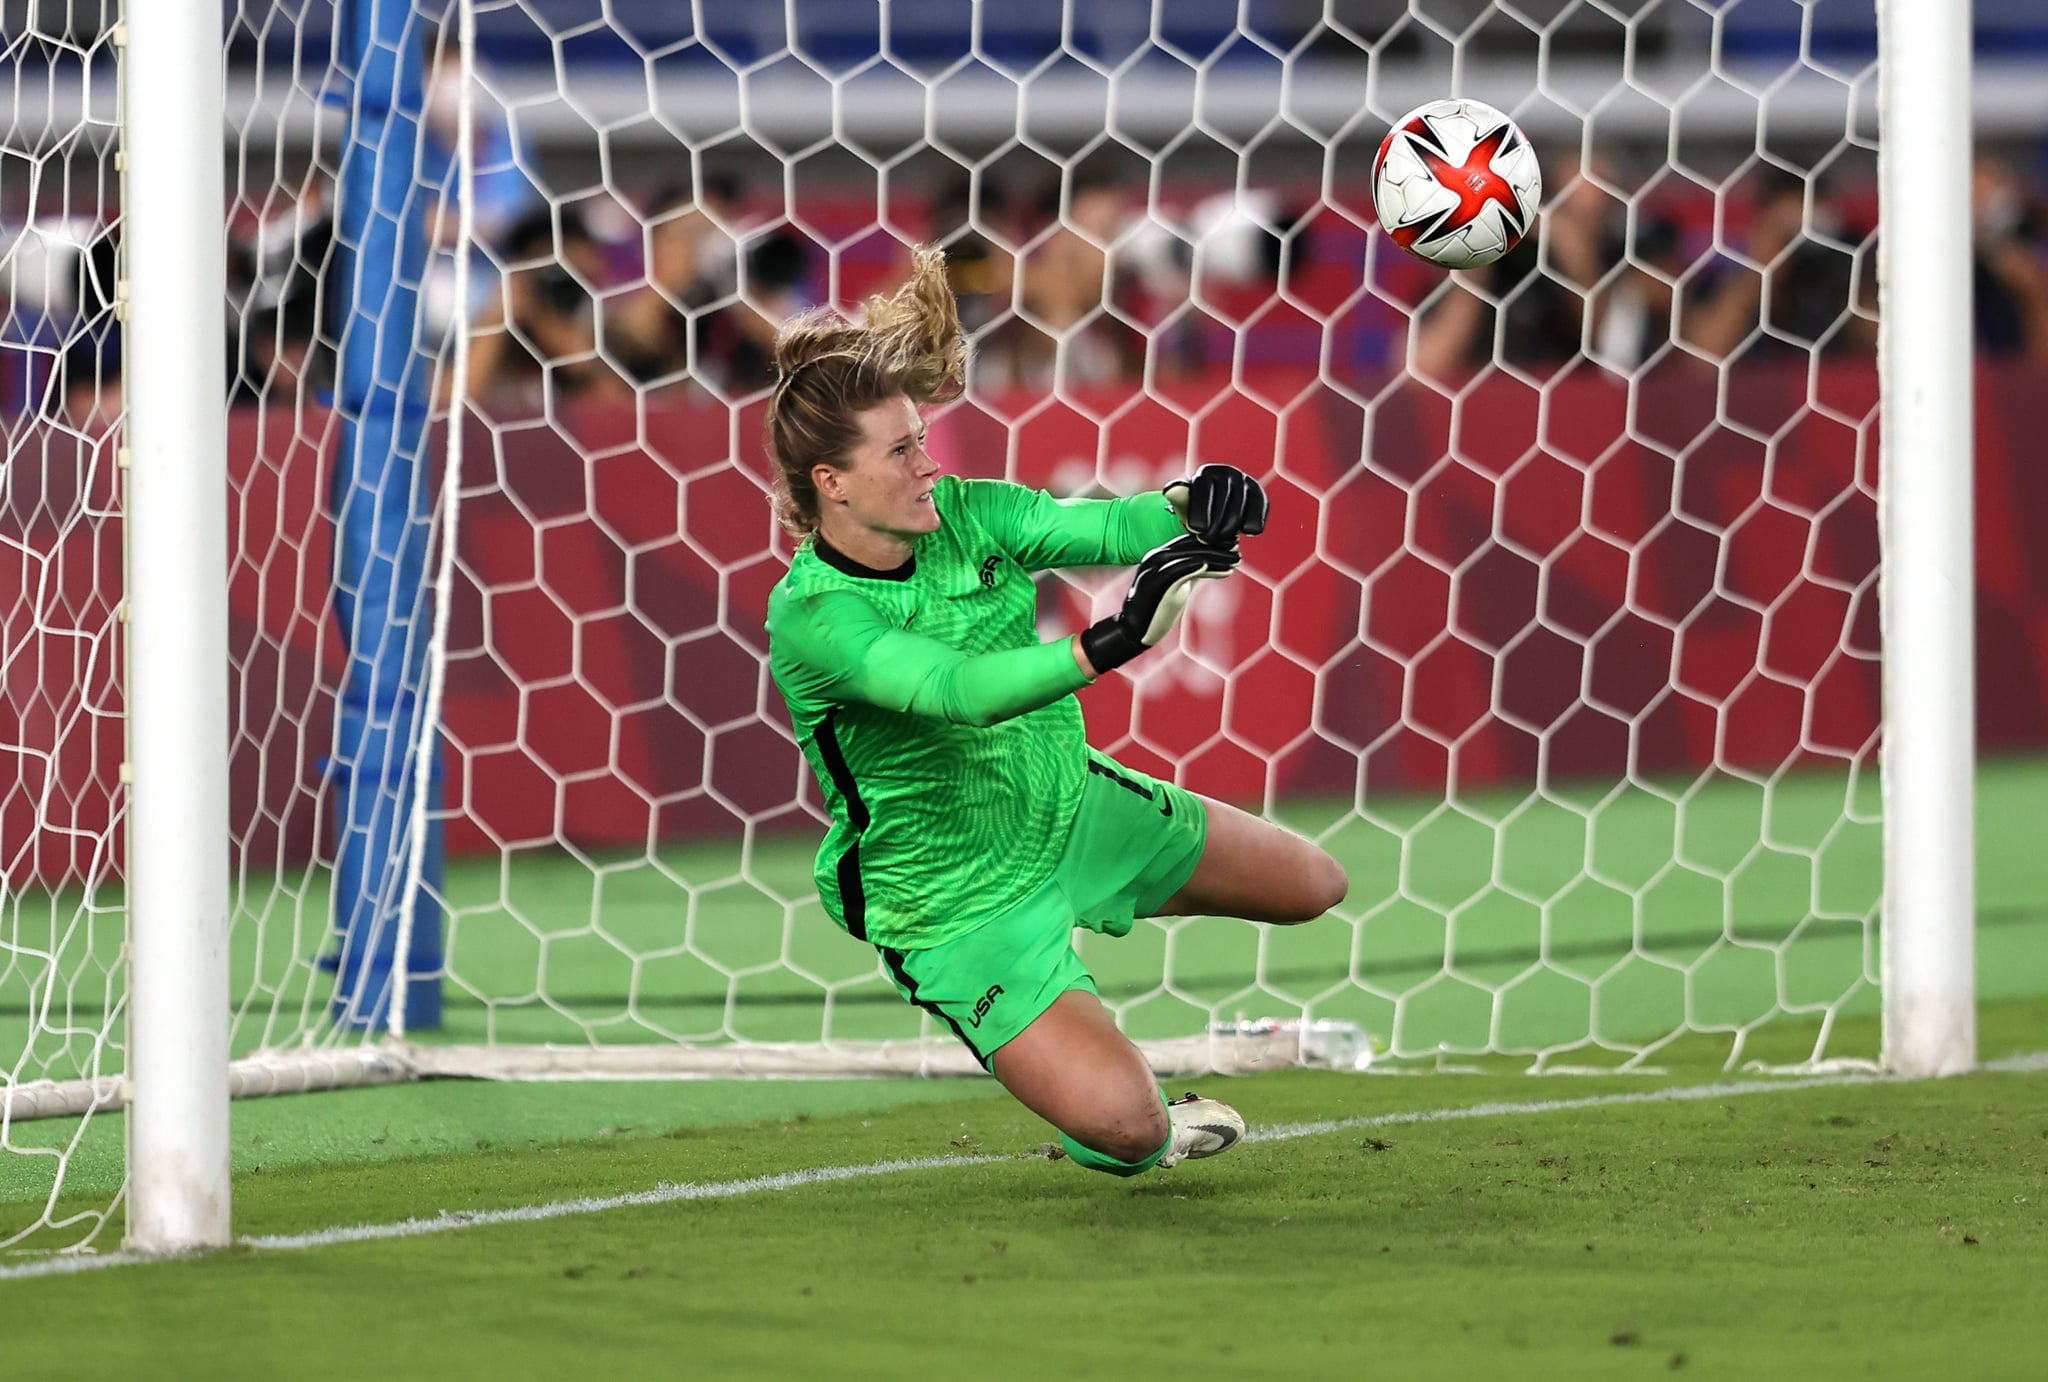 YOKOHAMA, JAPAN - JULY 30: Alyssa Naeher #1 of Team United States saves the fourth penalty from Aniek Nouwen #4 of Team Netherlands during the Women's Quarter Final match between Netherlands and United States on day seven of the Tokyo 2020 Olympic Games at International Stadium Yokohama on July 30, 2021 in Yokohama, Kanagawa, Japan. (Photo by Francois Nel/Getty Images): why do football goalies wear a different colour?